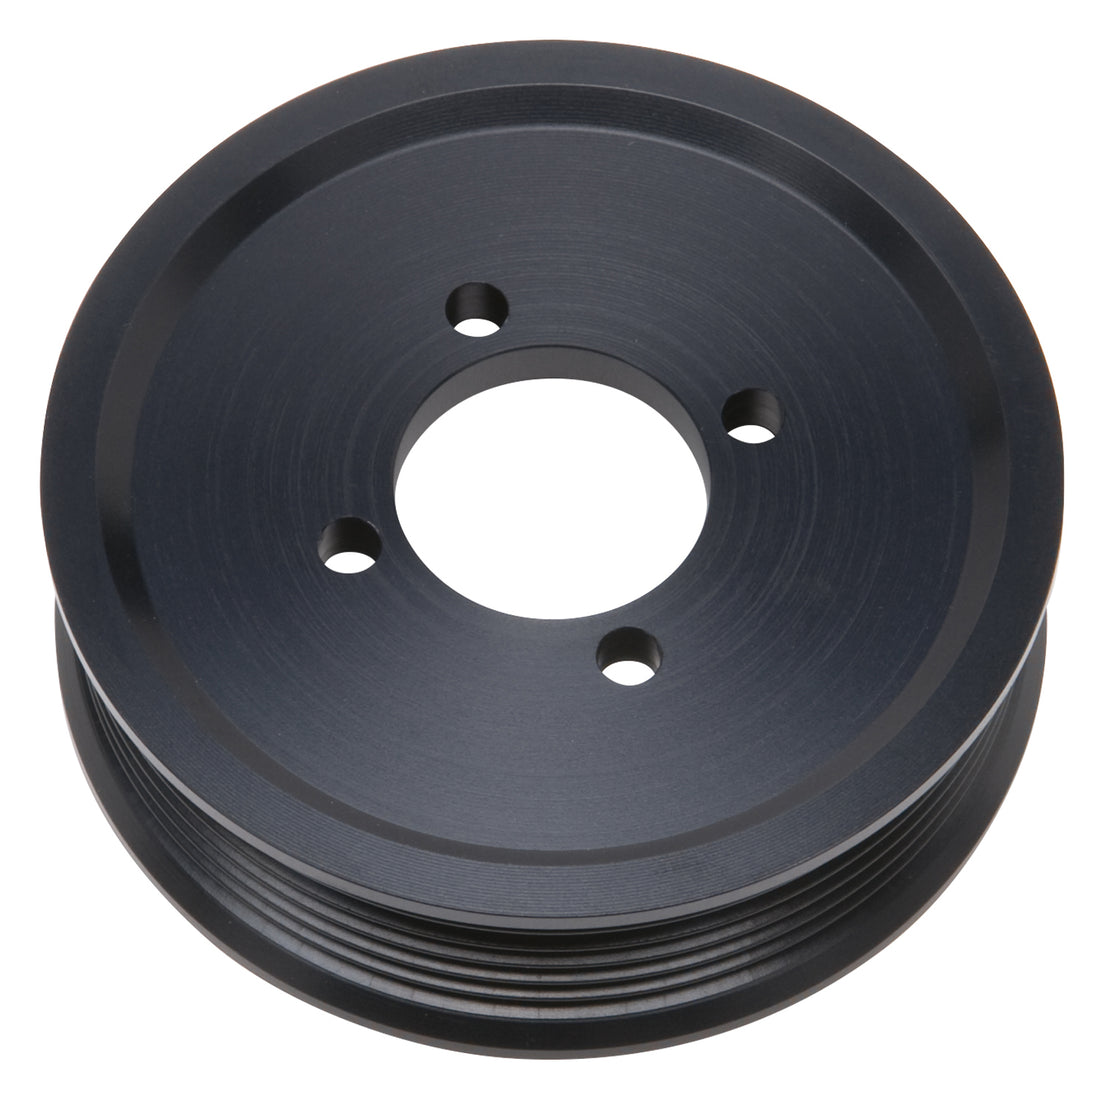 Edelbrock Competition Supercharger Pulley #15824 3.875 in. 6-Rib, Black Anodized Edelbrock